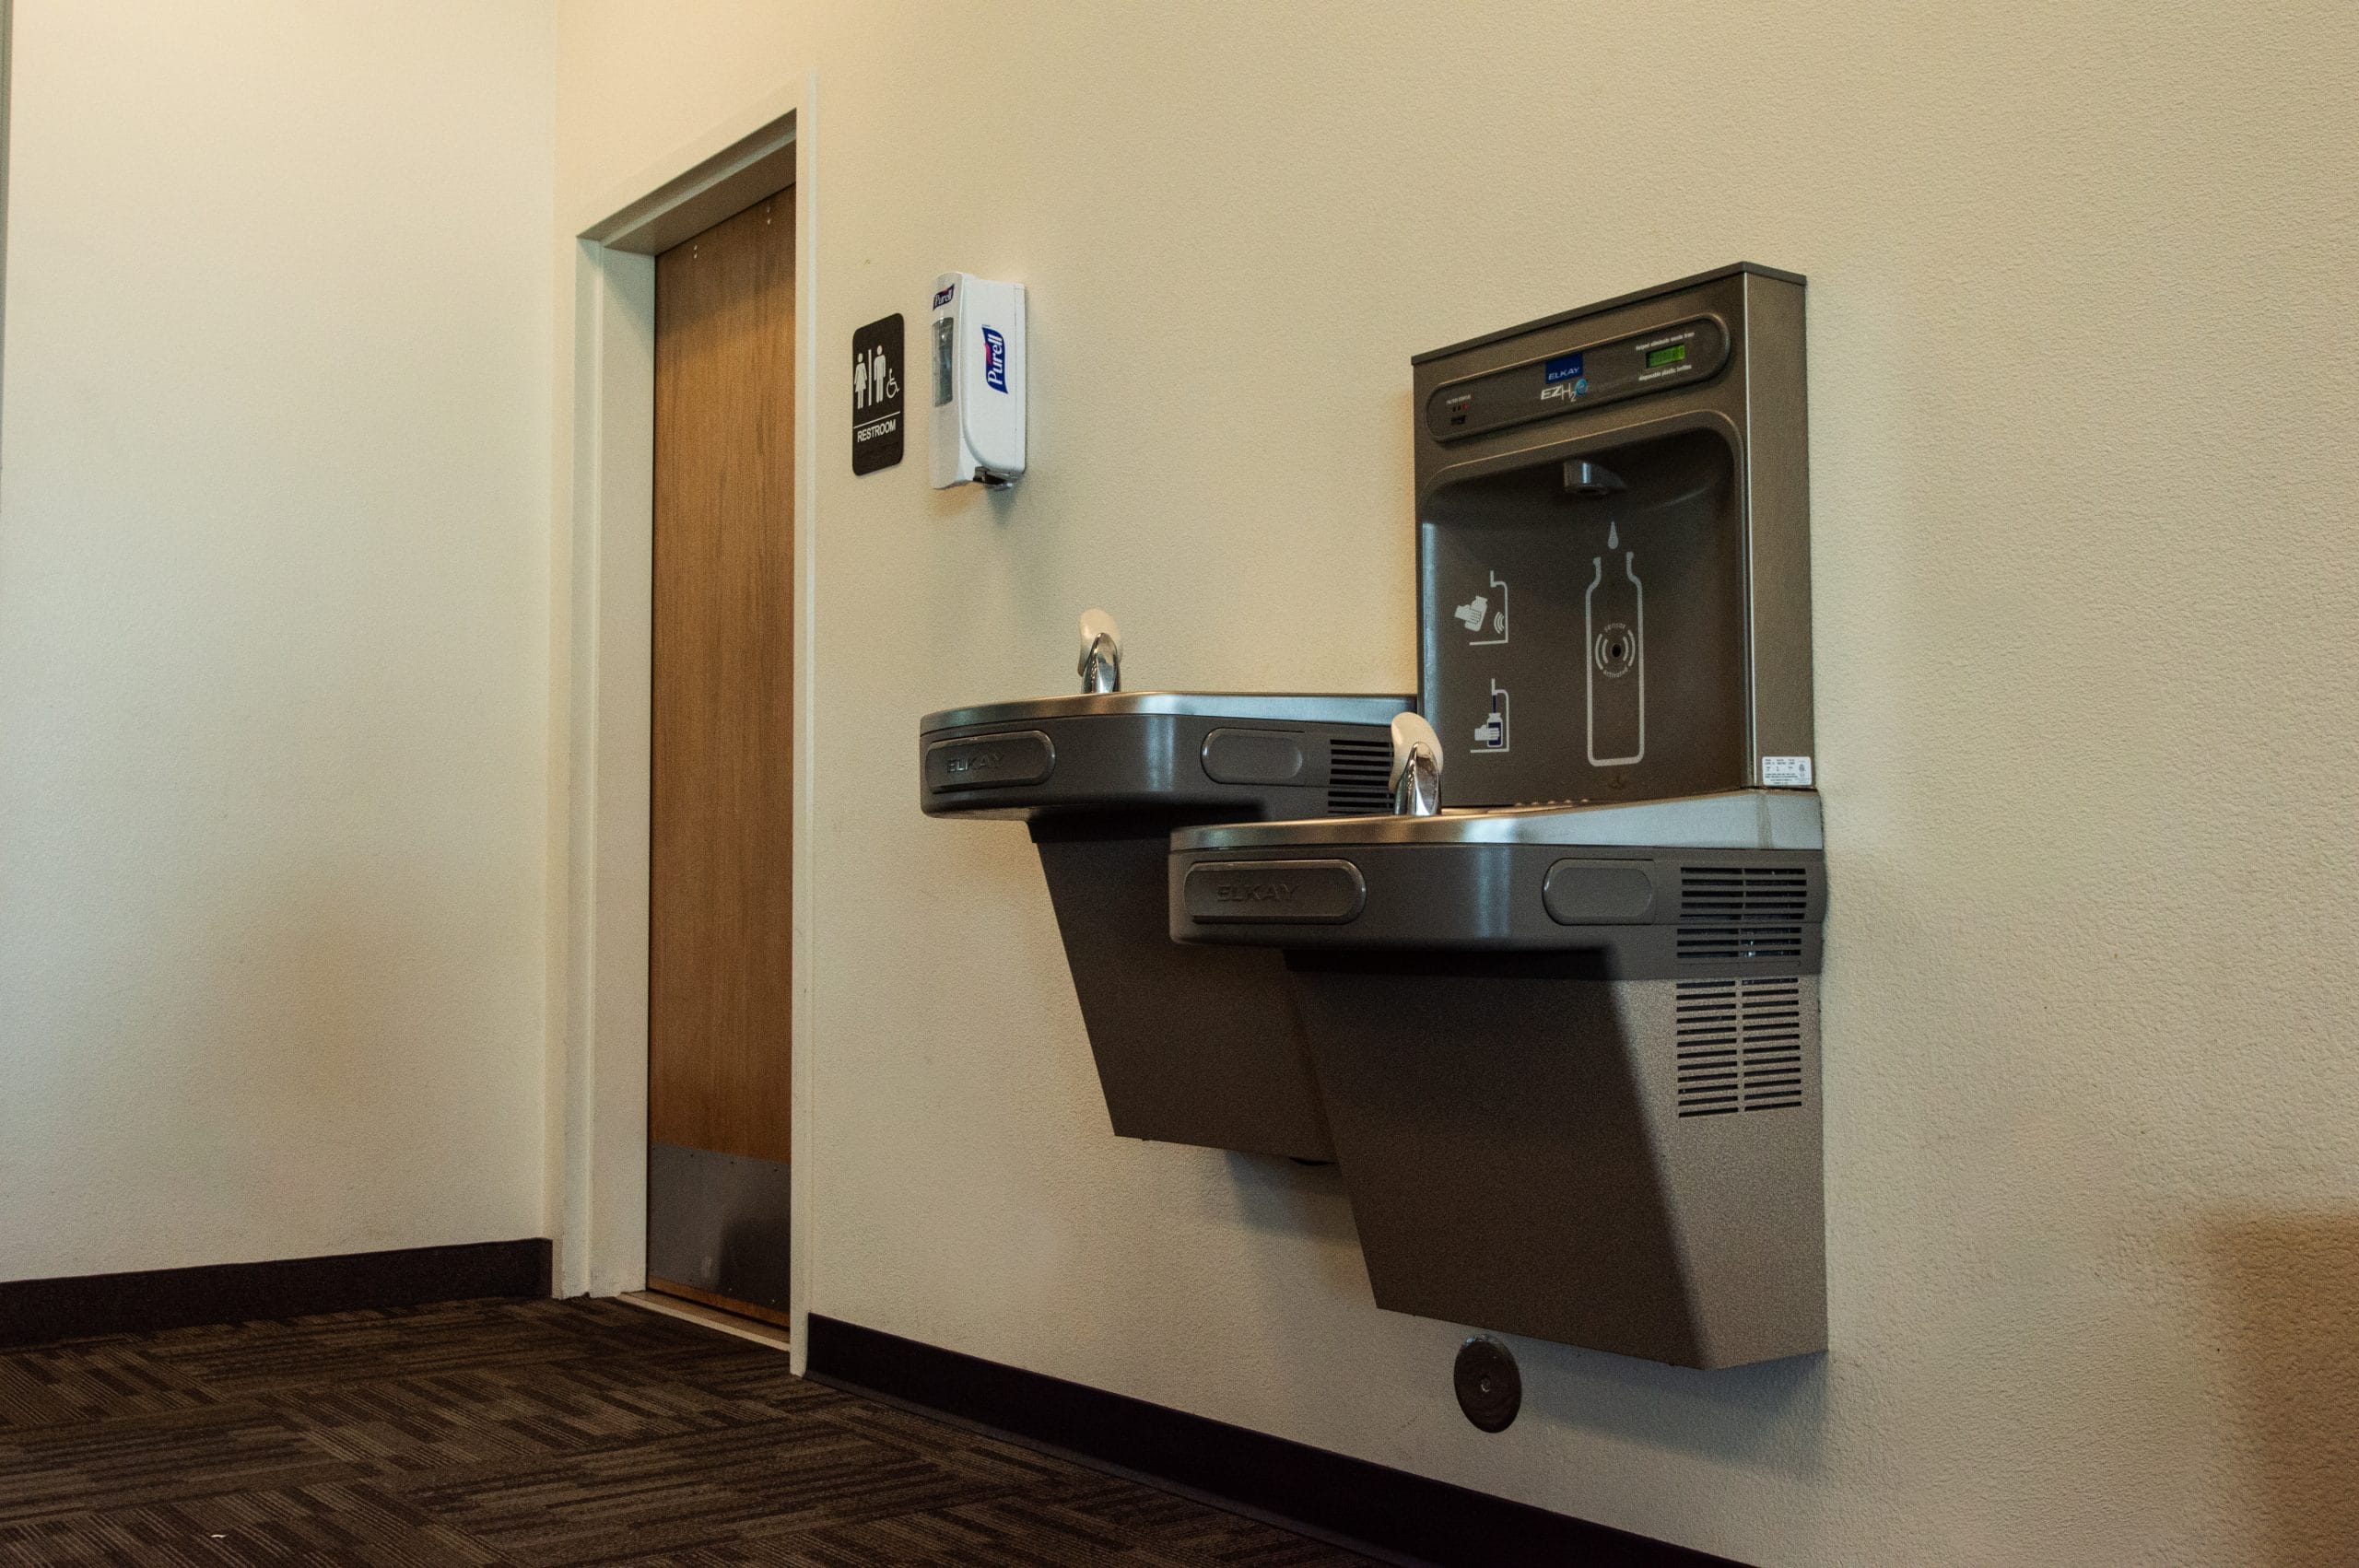 Drinking fountain and bottle filler at FLG Airport terminal